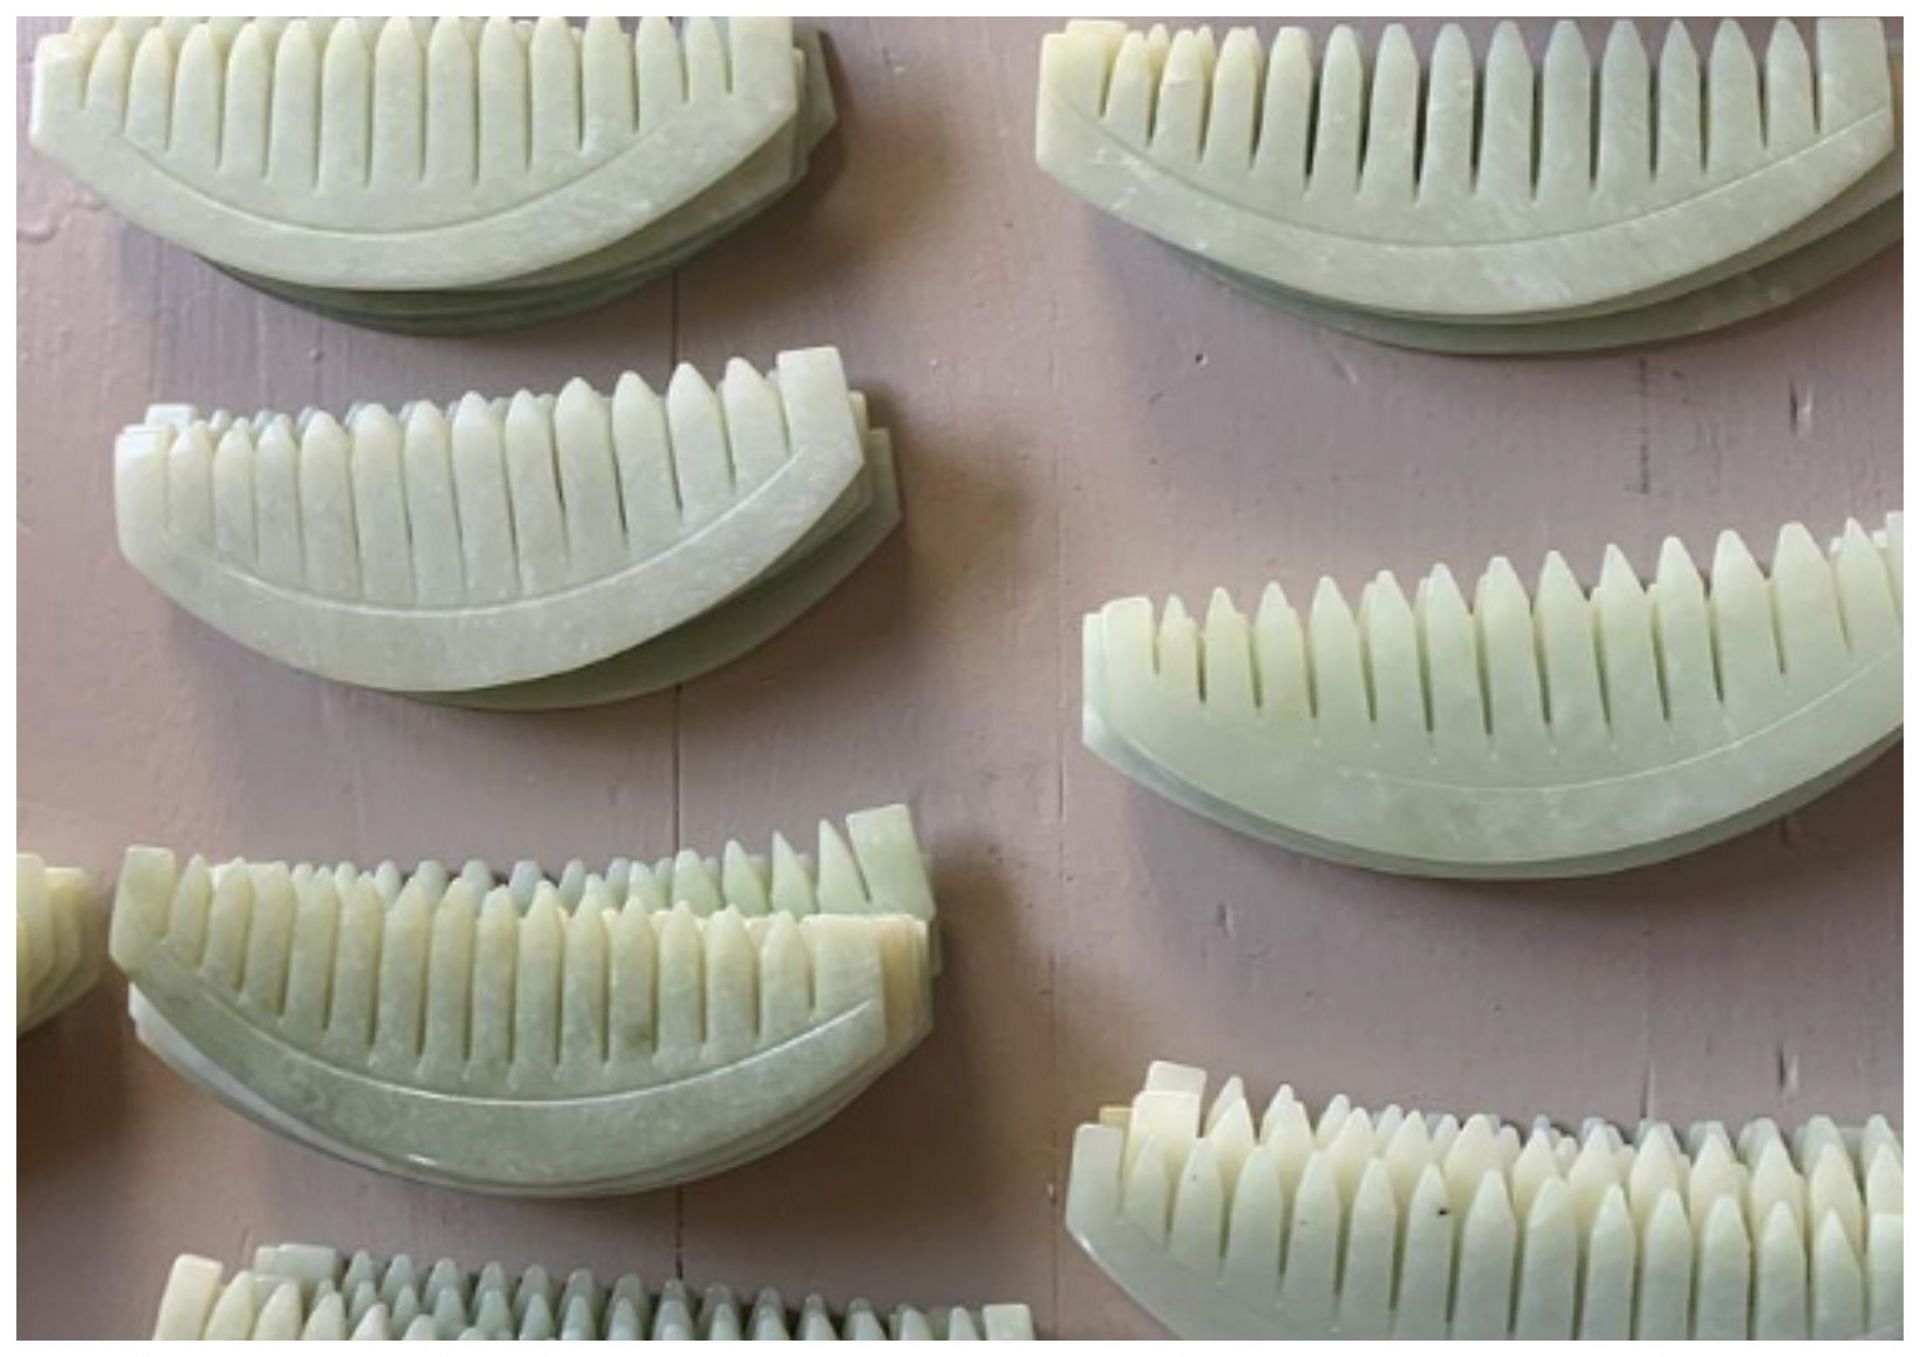 Benefits of using gua sha comb for hair (Image via Instagram)